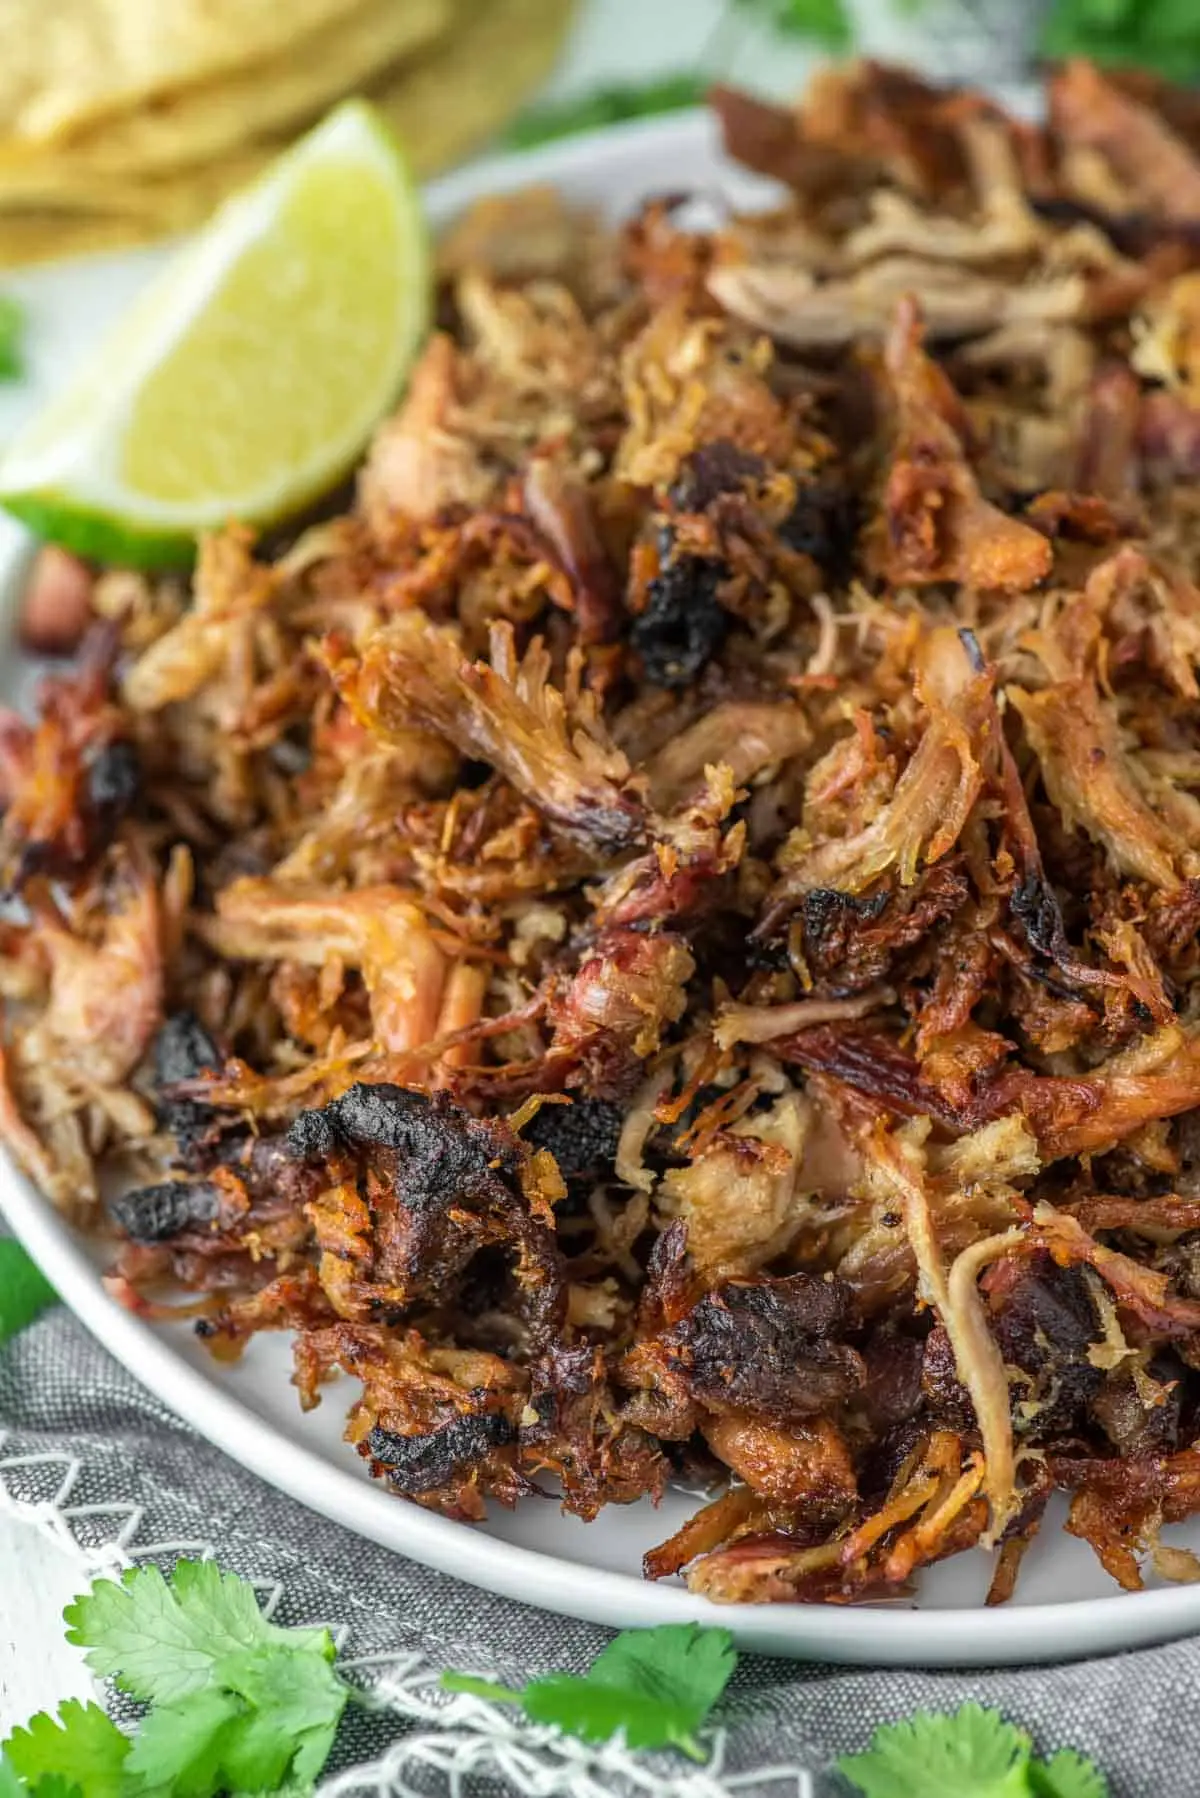 smoked carnitas recipe - What is the best cut of meat for carnitas